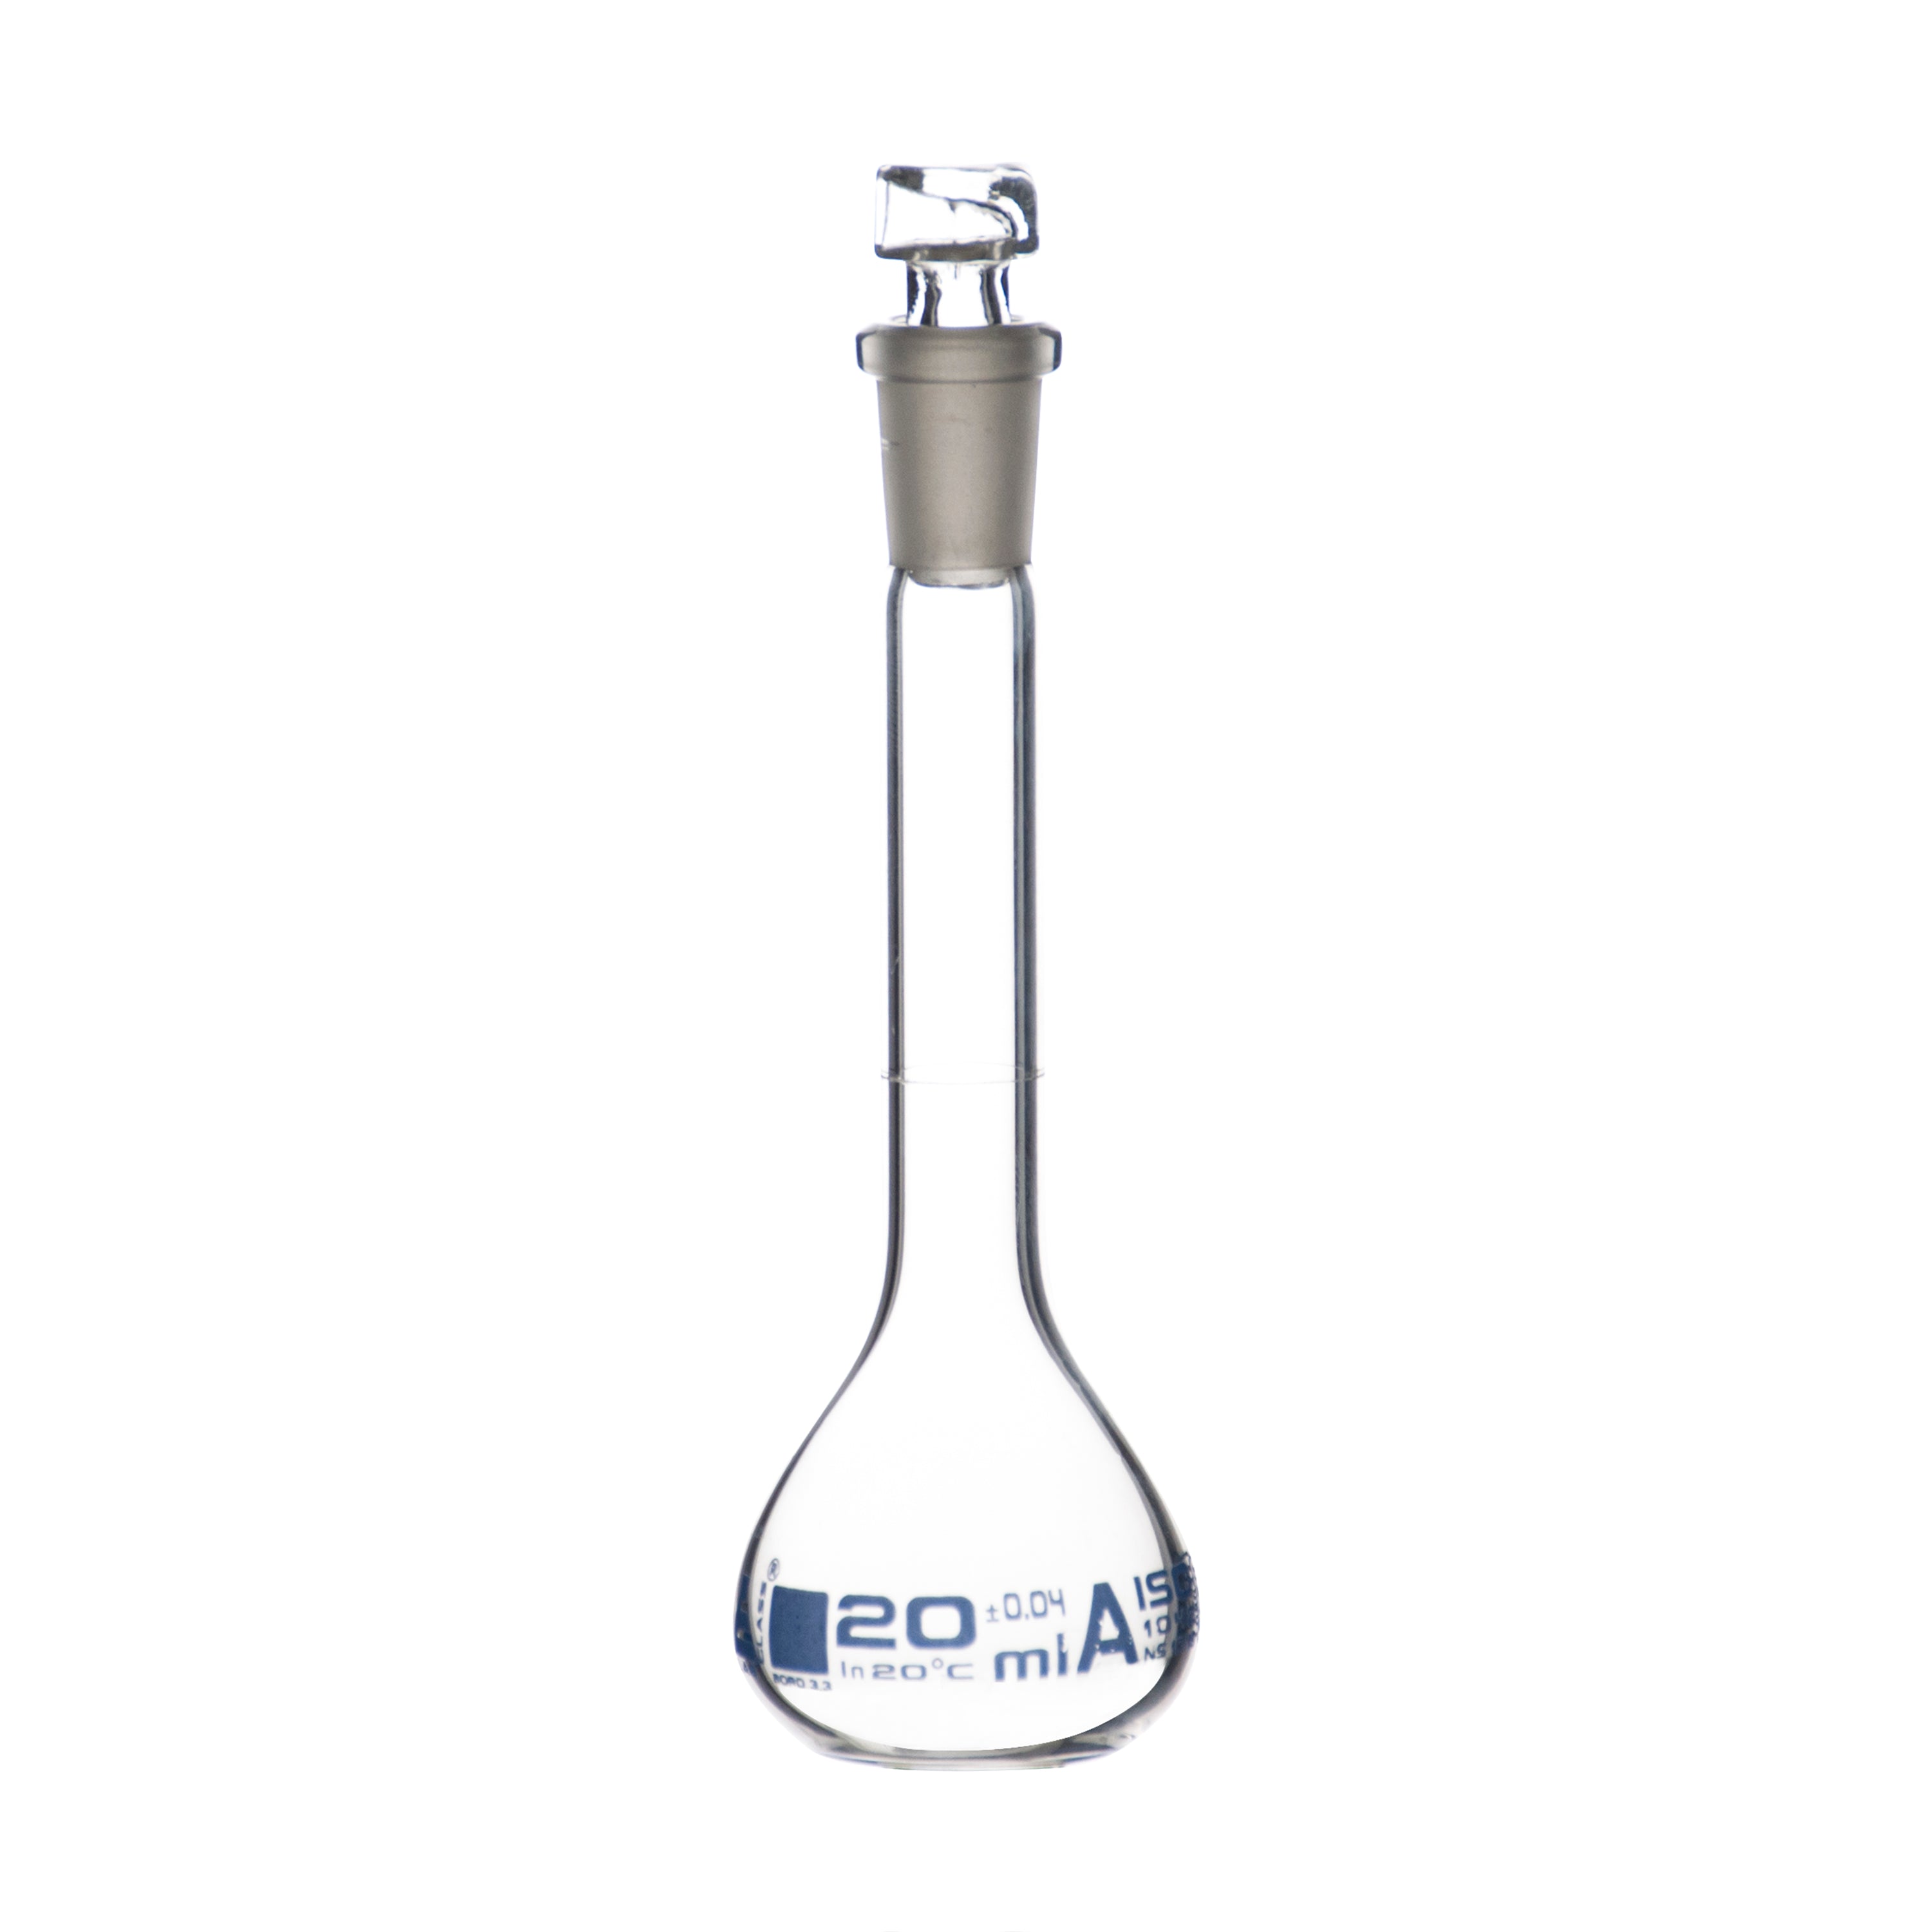 Borosilicate Volumetric Flask with Hollow Glass Stopper, 20ml, Class A, Blue Print, Autoclavable